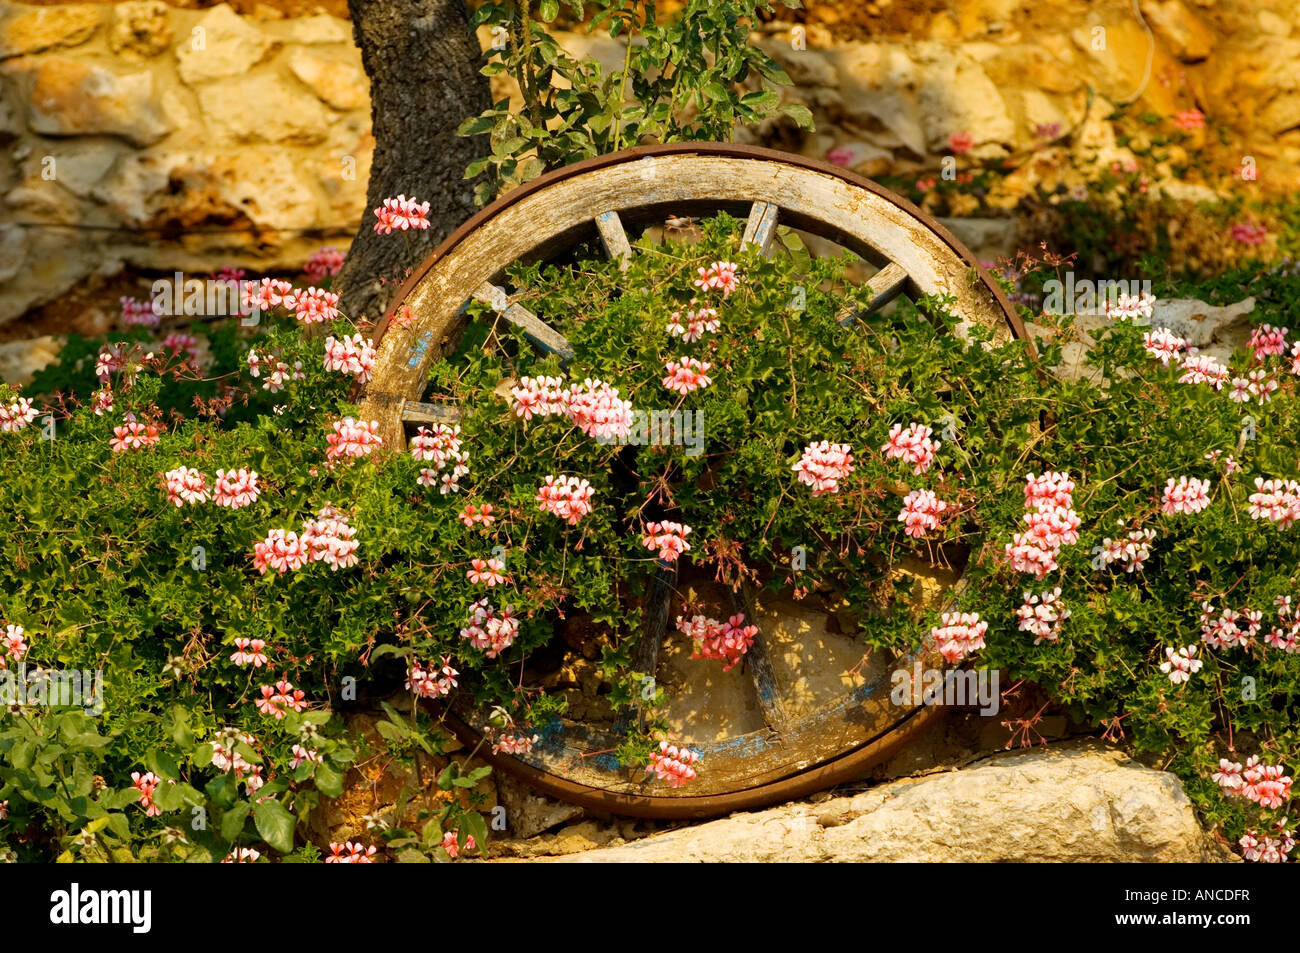 Old fashioned wooden wheel covered with flowers Stock Photo